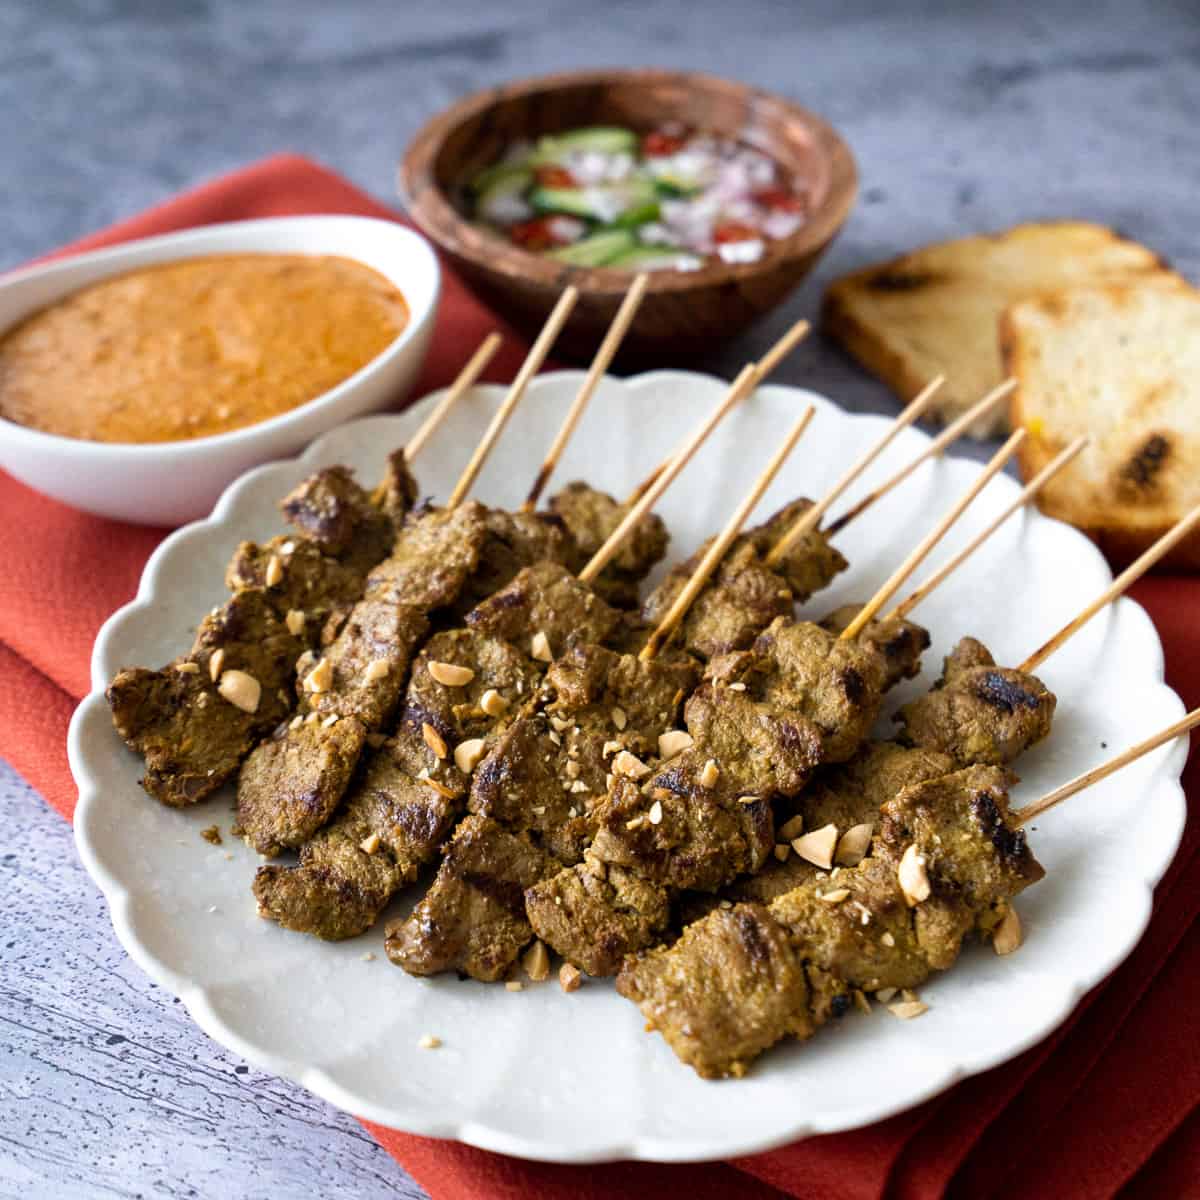 A plate of beef satay with a side of peanut sauce, pickles, and toast